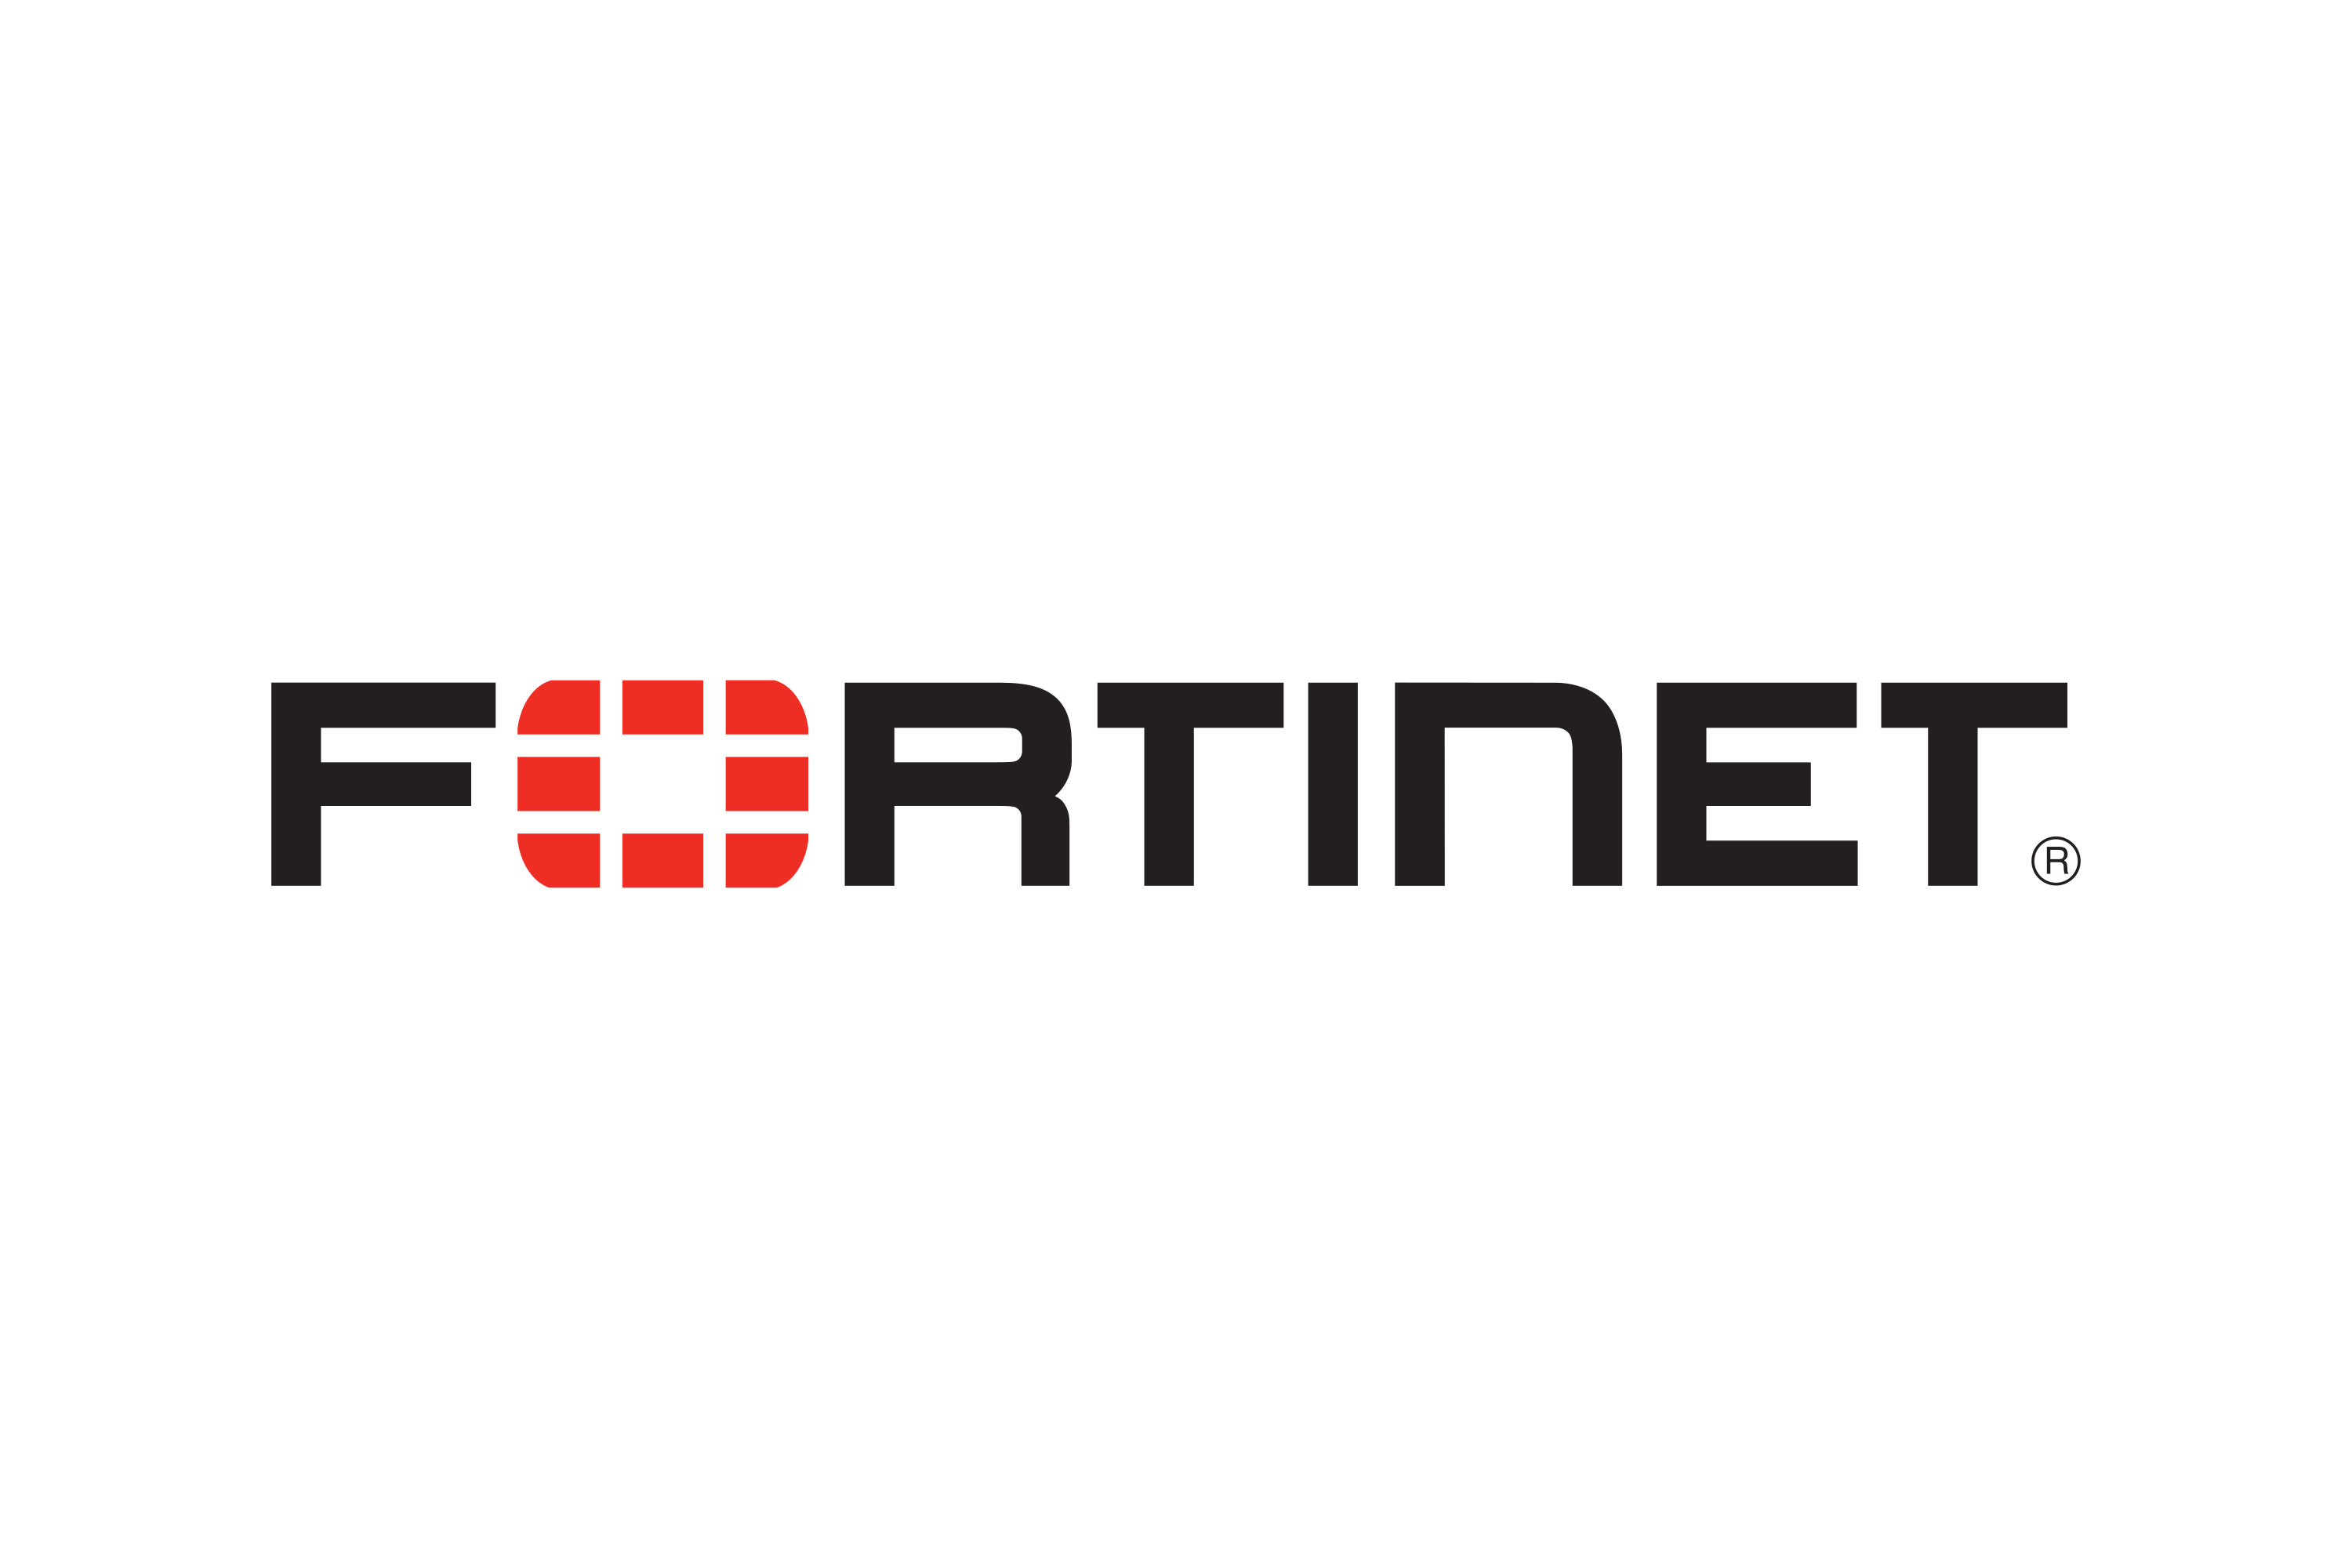 Firewall 7.0 Dumps Why People Choose Fortinet For Career?